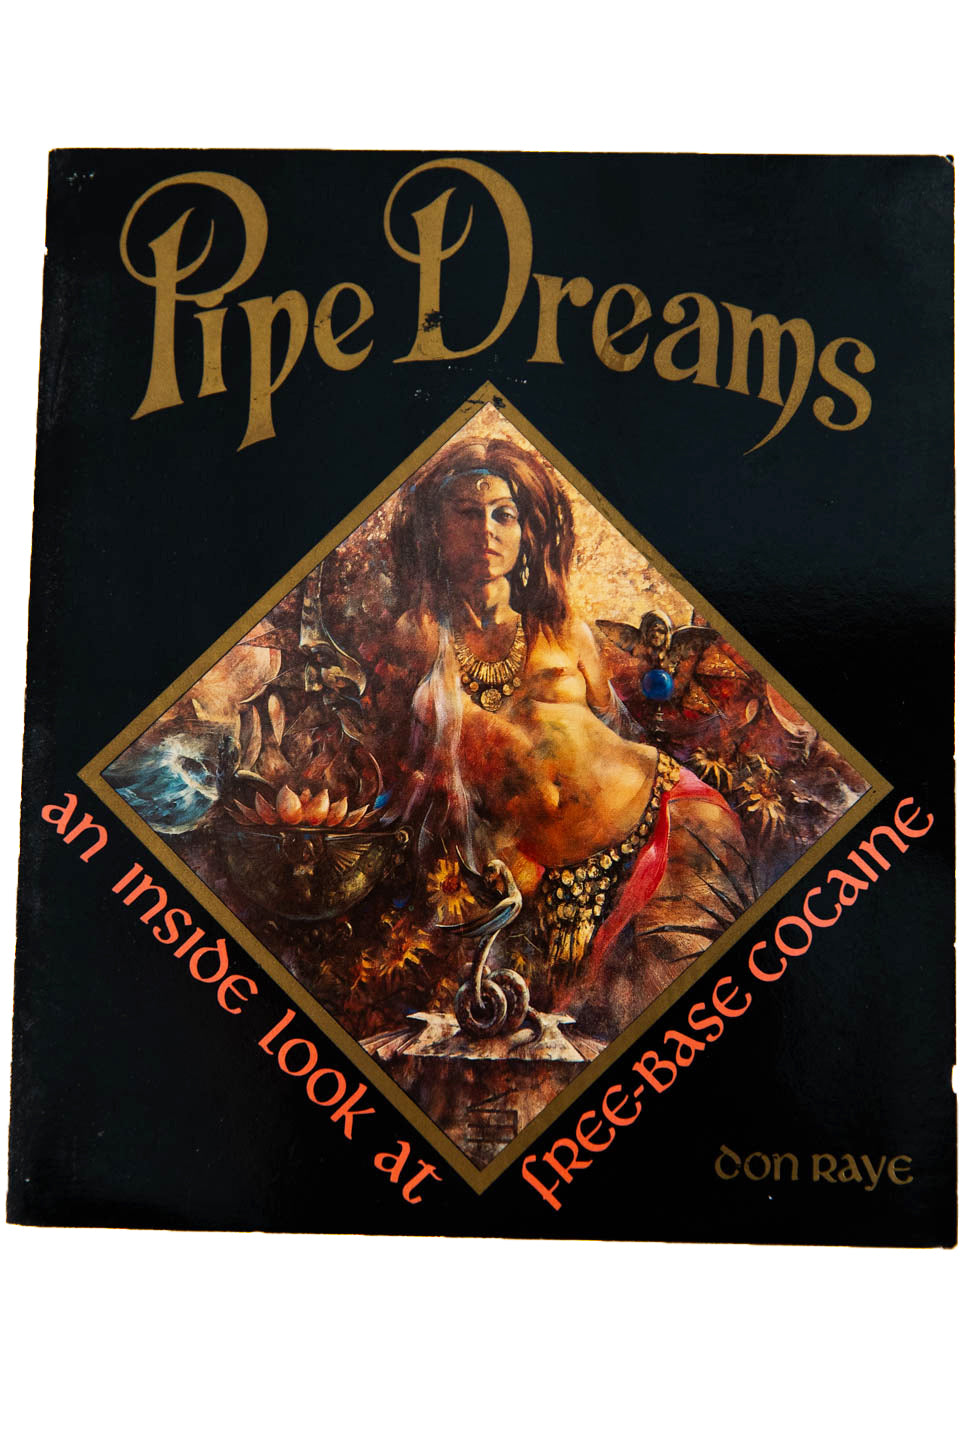 PIPE DREAMS | An Inside Look At Free-base Cocaine